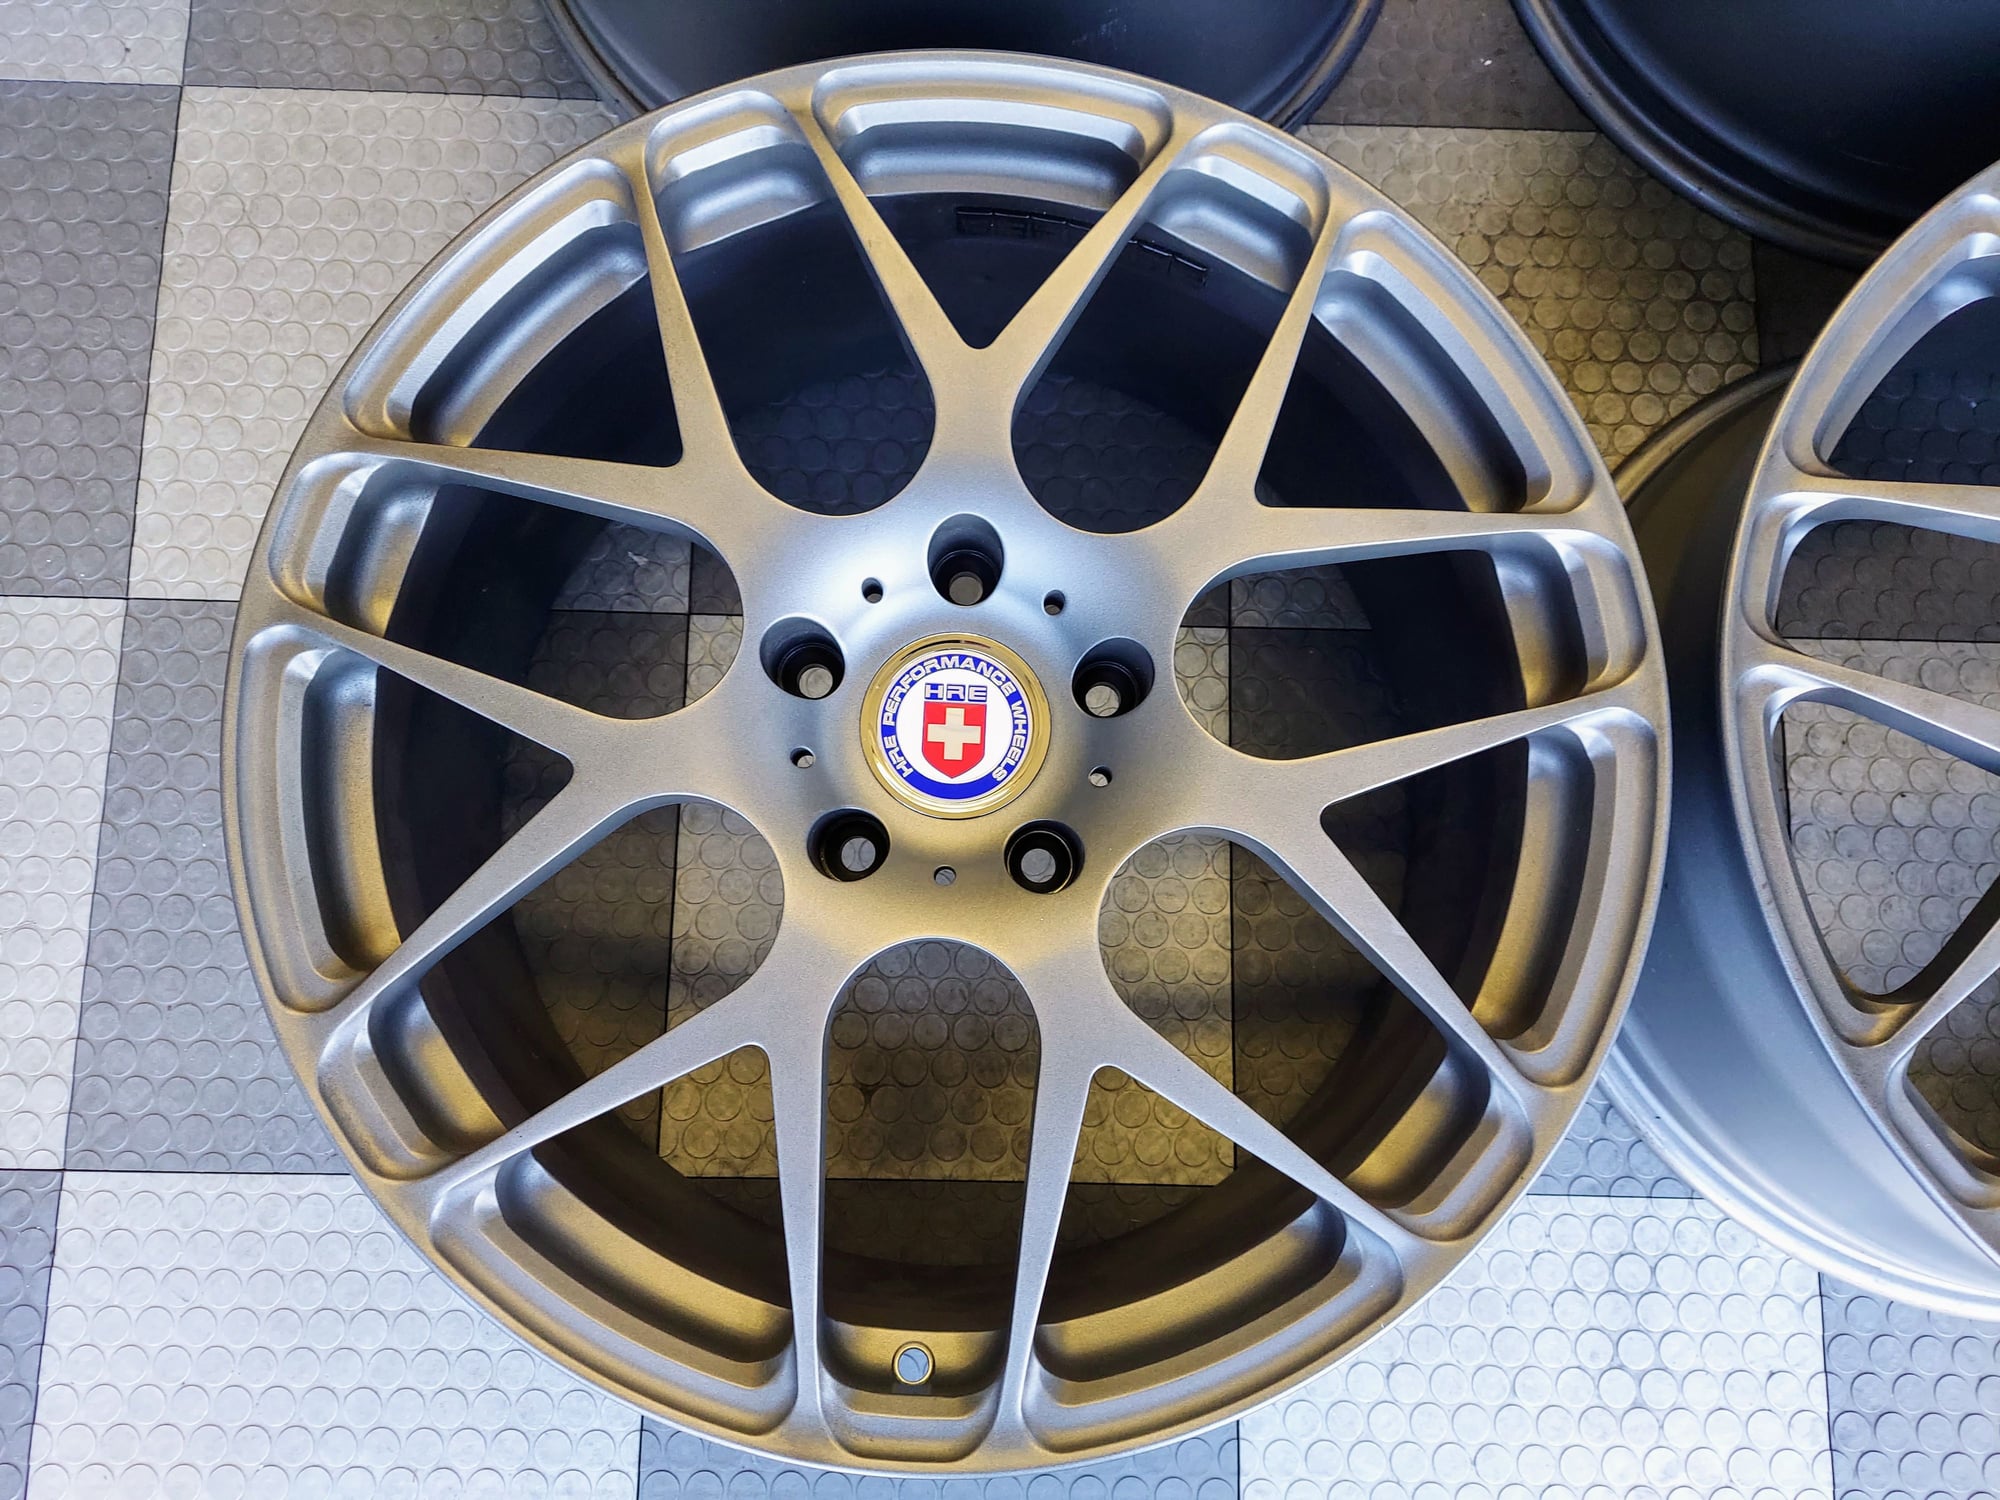 Wheels and Tires/Axles - HRE Profile P40 Series Forged Monoblok 20" Wheels - Used - Medina, OH 44256, United States